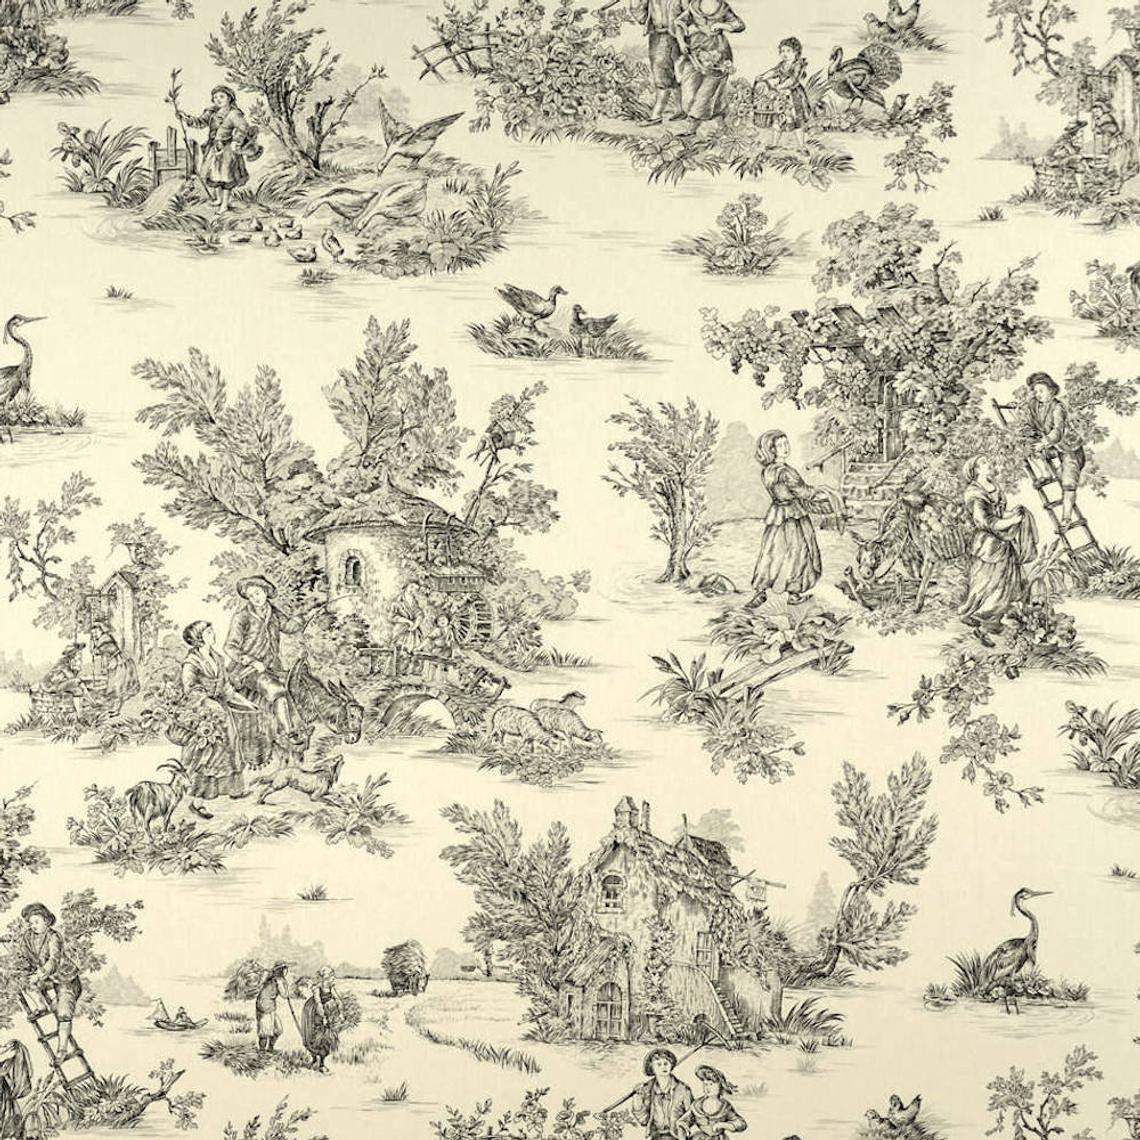 pillow sham in pastorale #1 black on cream french country toile